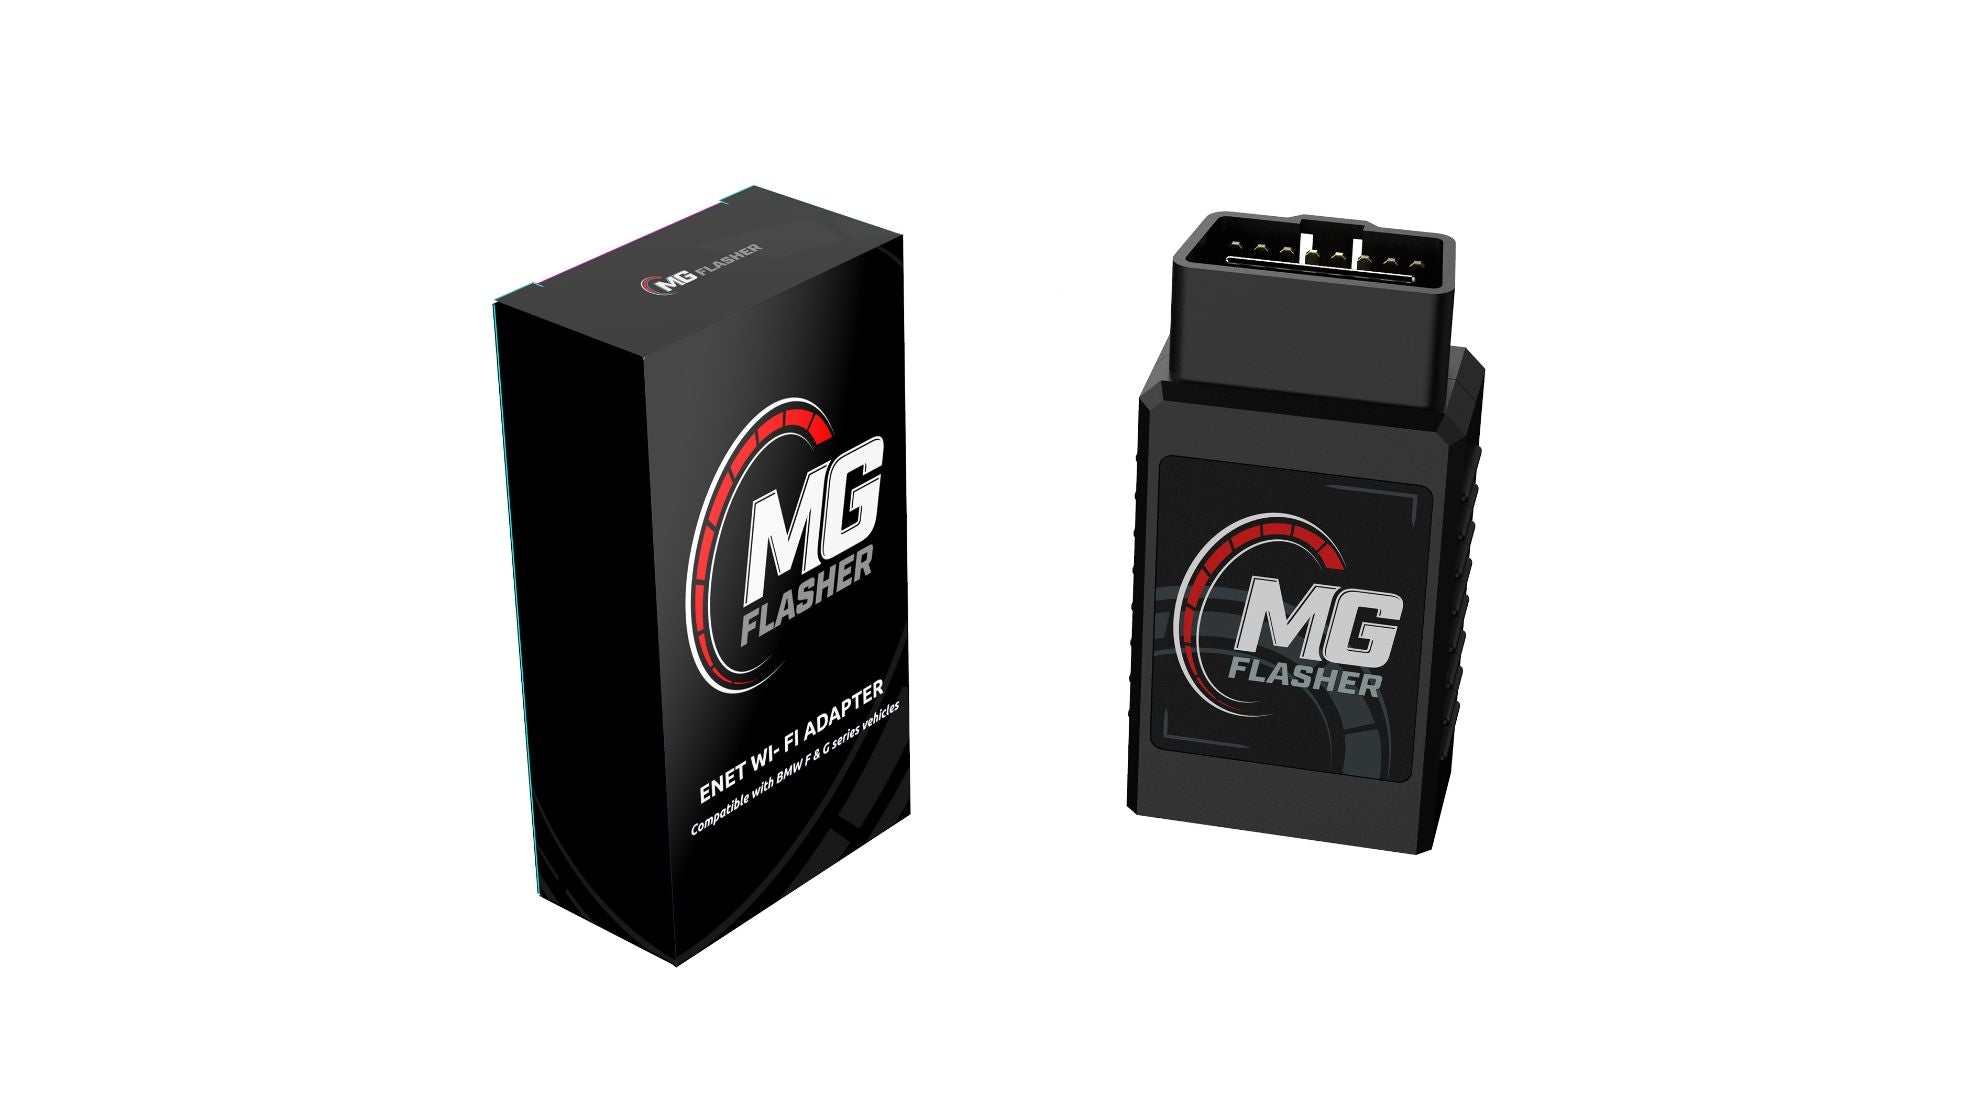 MG Flasher Store - MG Flasher ENET Wi-Fi adapter